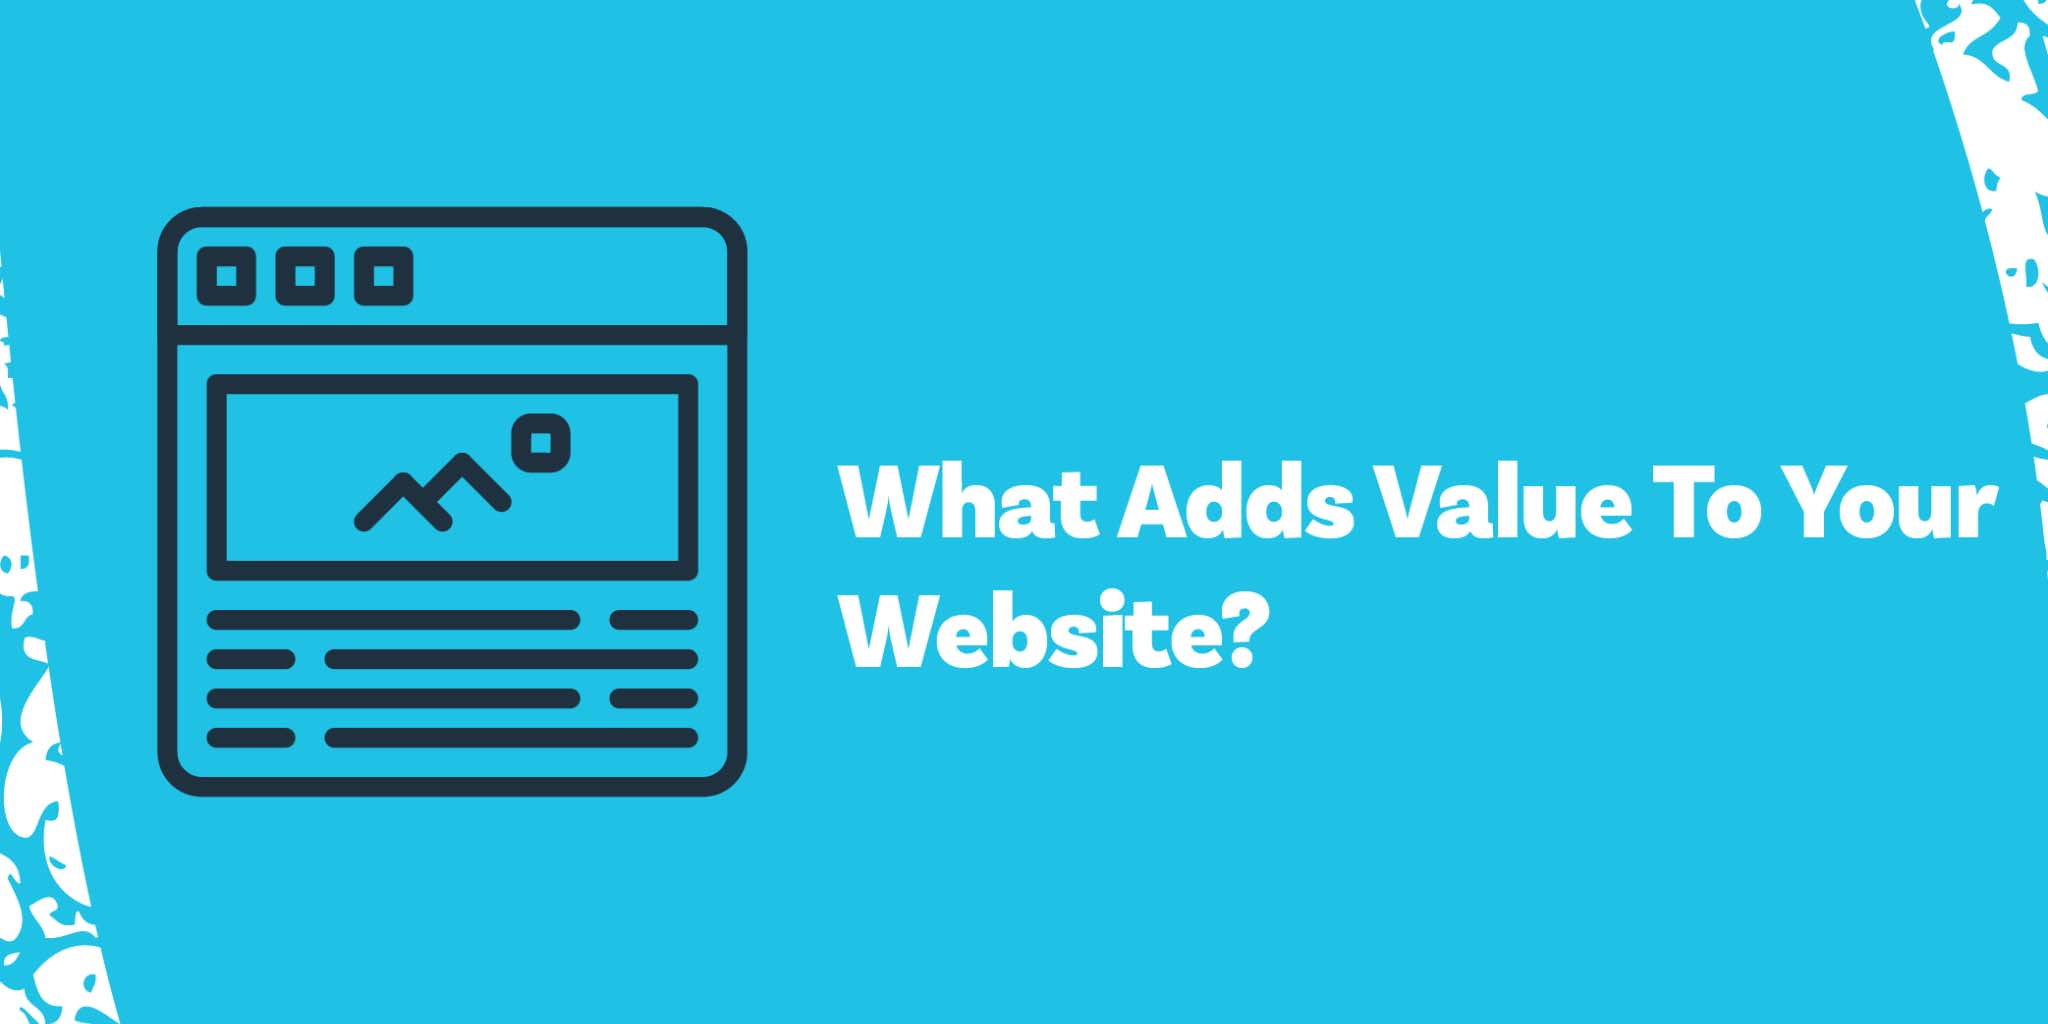 Blog Thumbnail of an website layout graphic and title "What Adds Value To Your Website?"